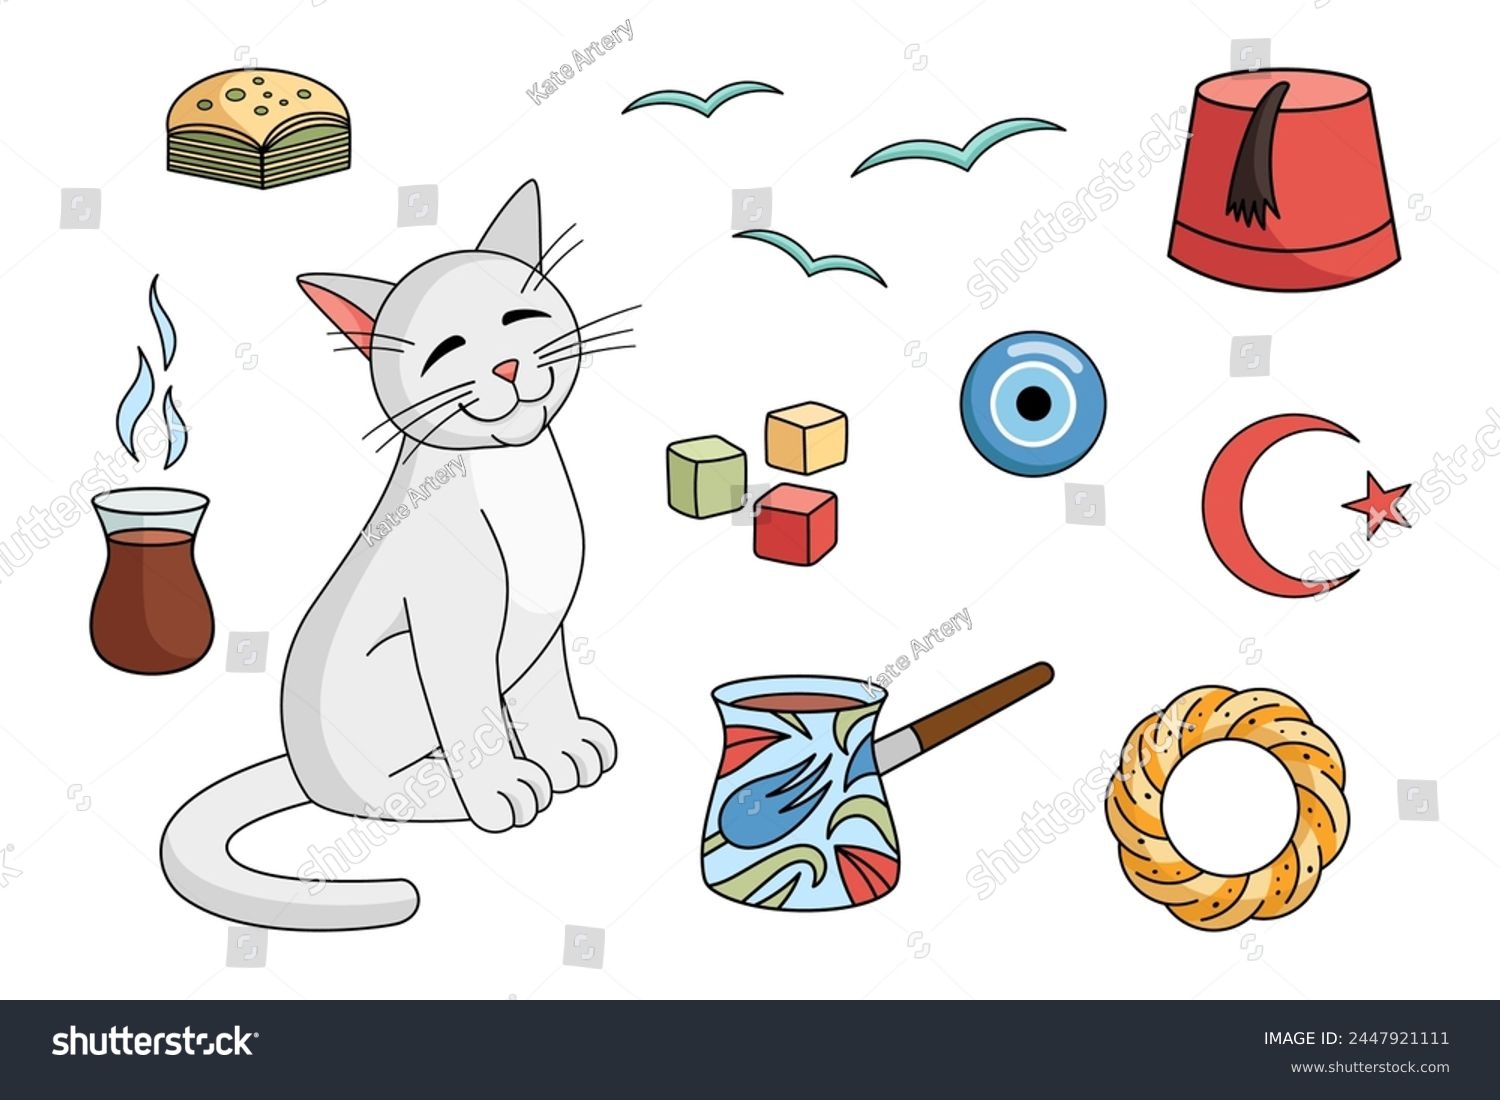 SVG of Turkish culture elements set - Cezve, tea cup, baklava, bagel, star and crescent, angora cat, delight, amulet, seagull, fez. Vector collection. Turkish angora cat character with Turkish cup of tea. svg